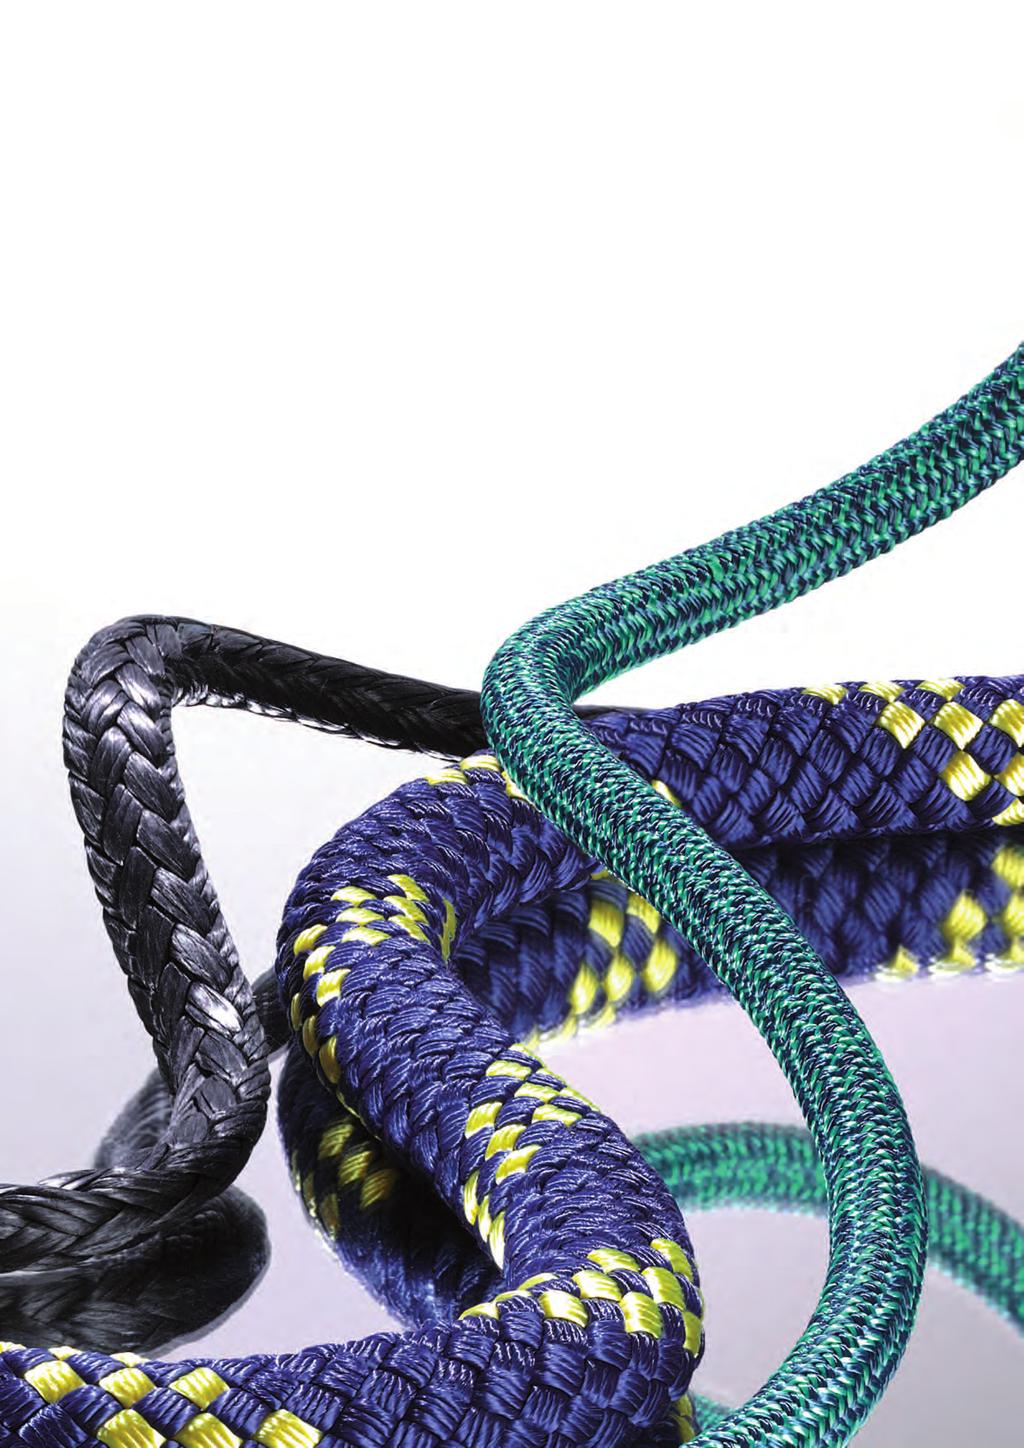 Unlimited Rope Solutions